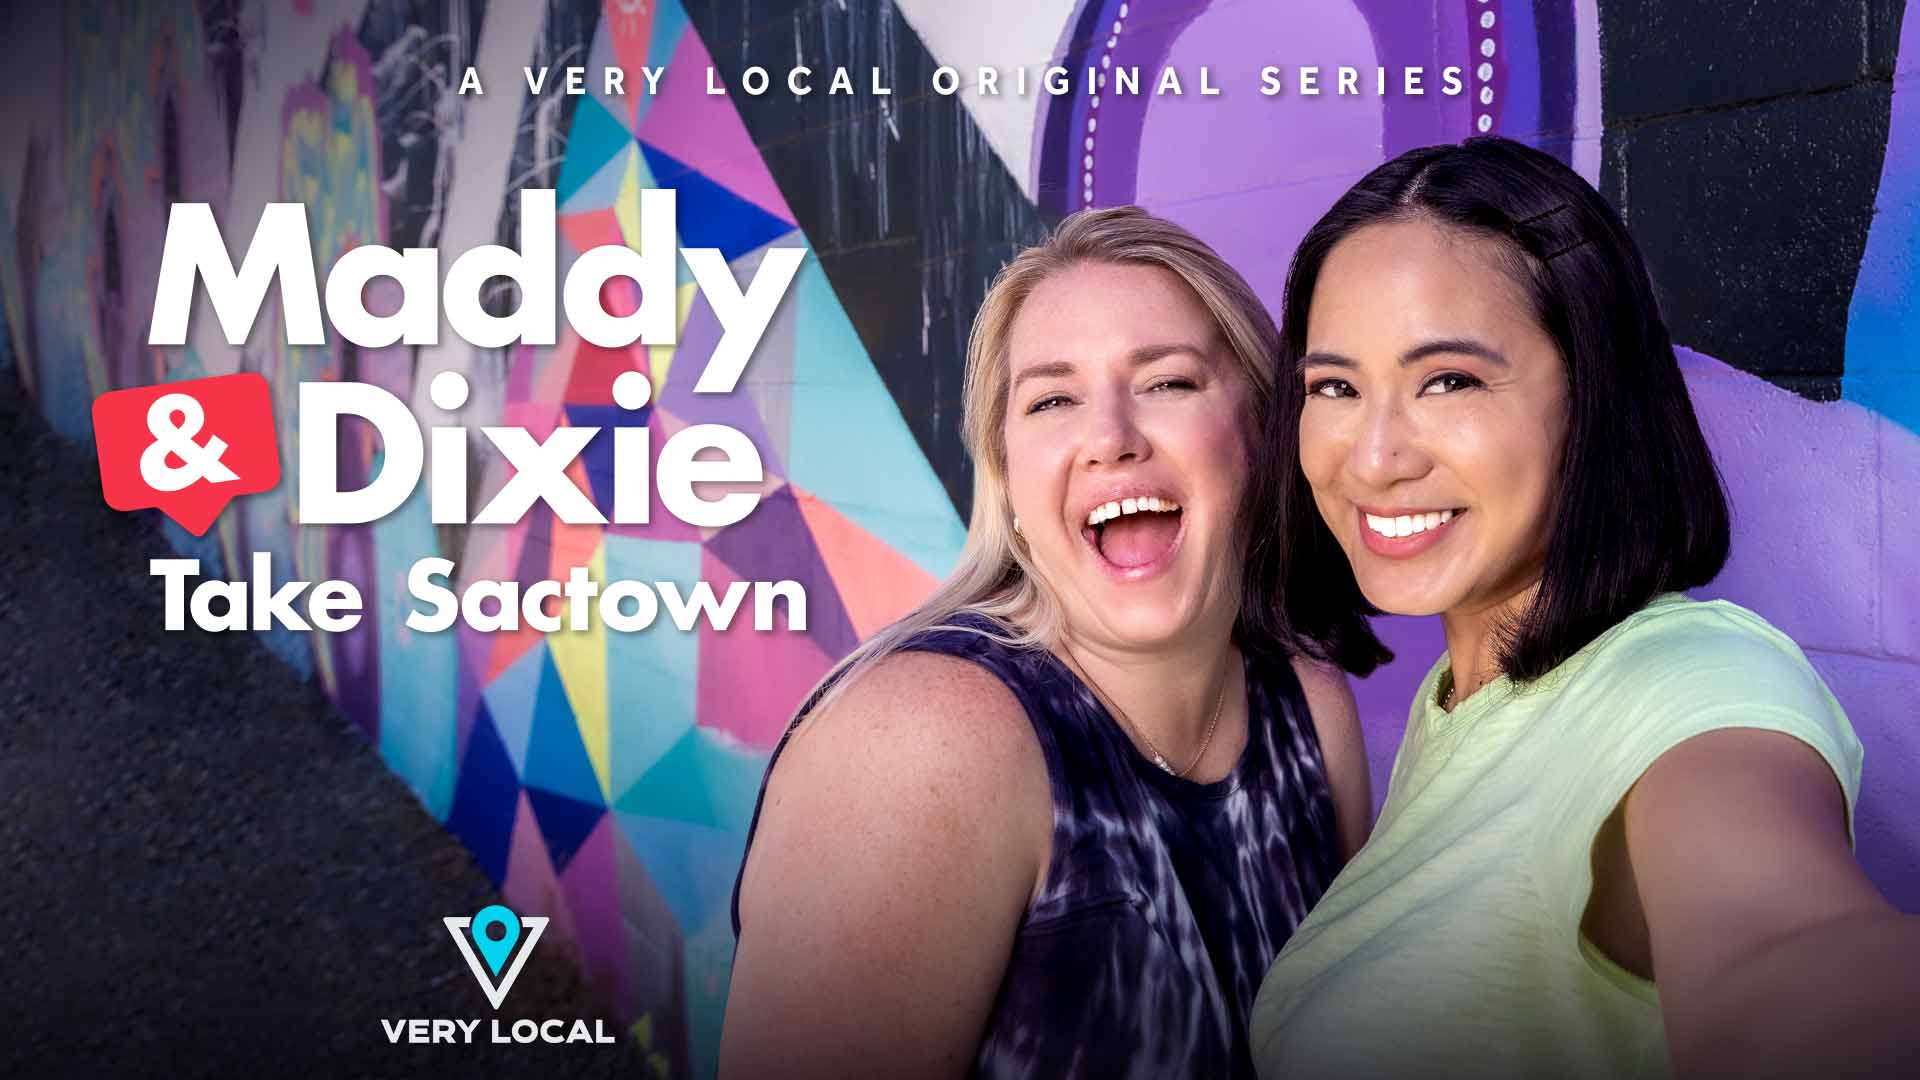 Watch Maddy and Dixie Take Sactown on Very Local